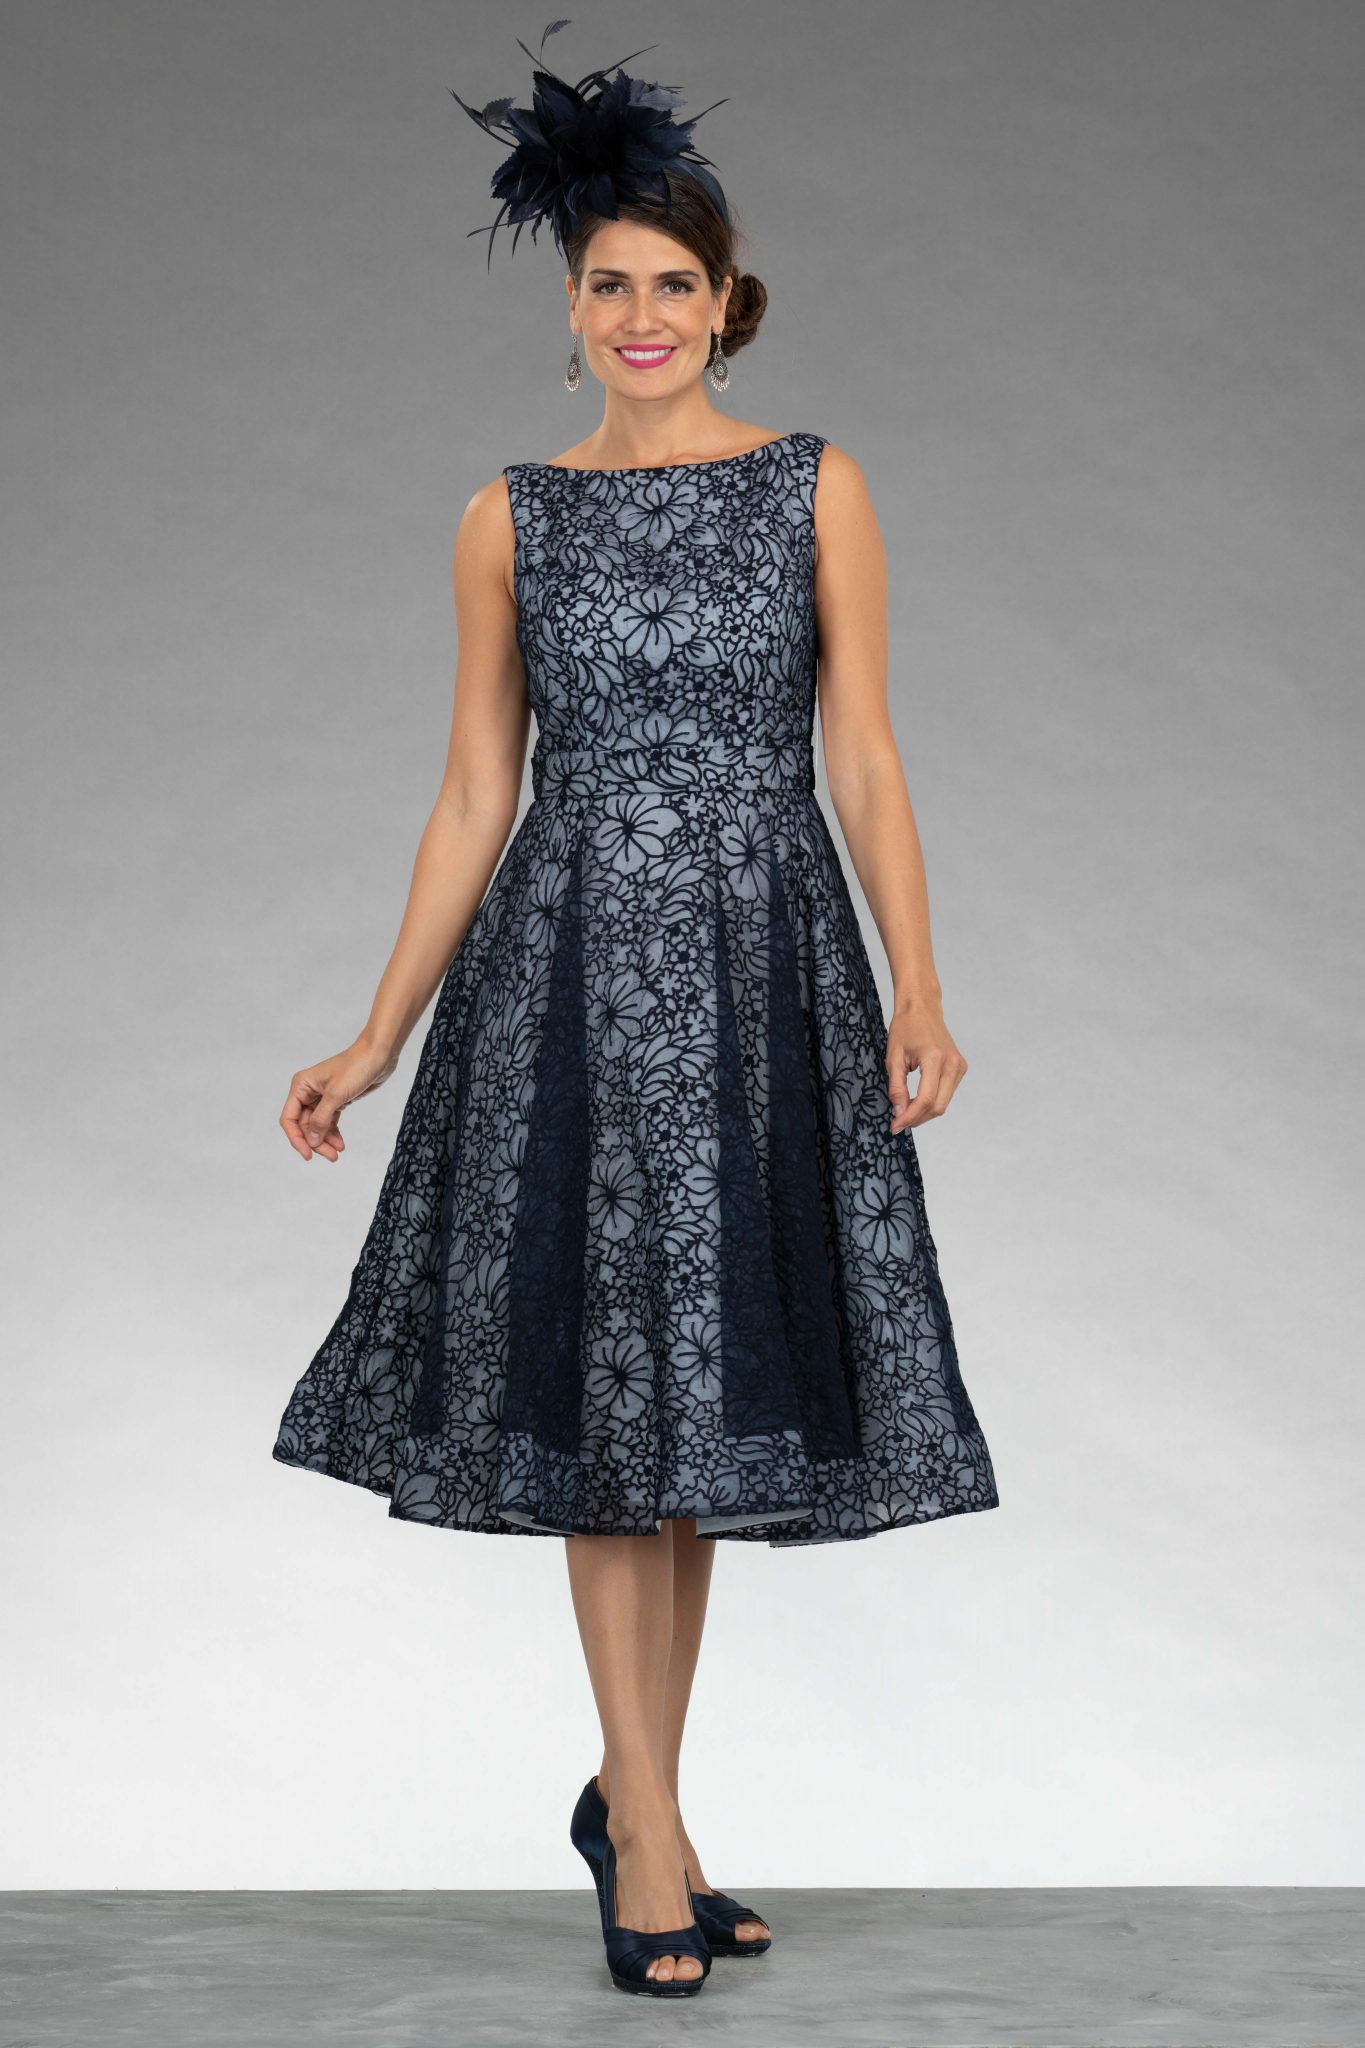 Short dress with full skirt. VO5003 - Catherines of Partick